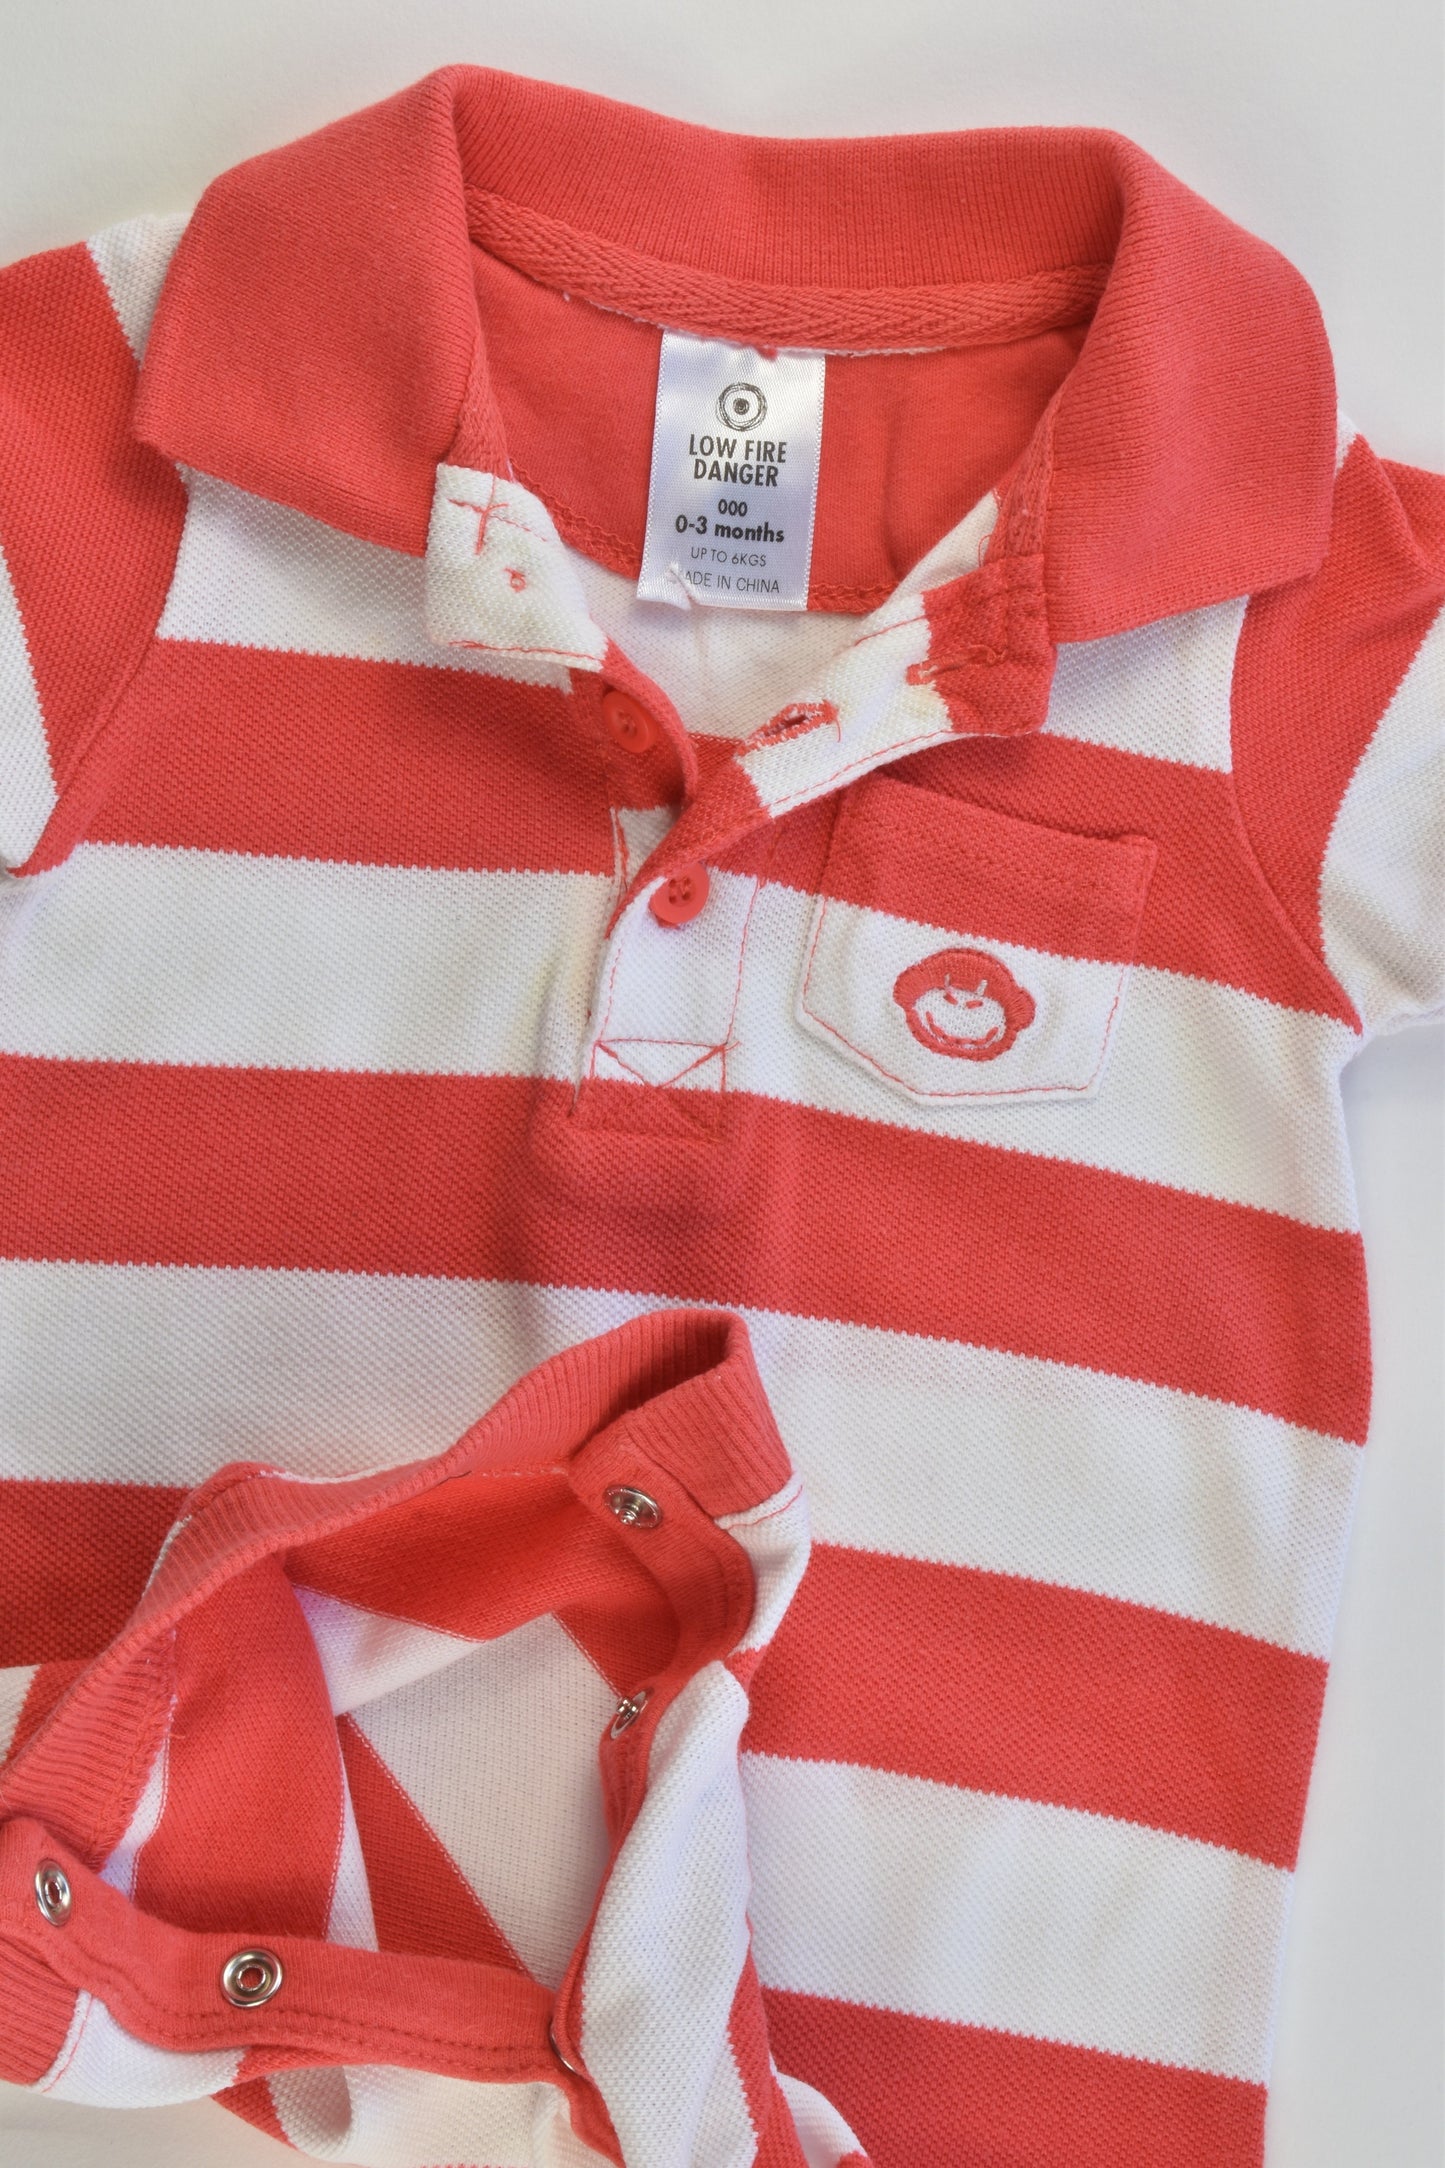 Target Size 000 (0-3 months) Striped Collared Monkey Short Romper